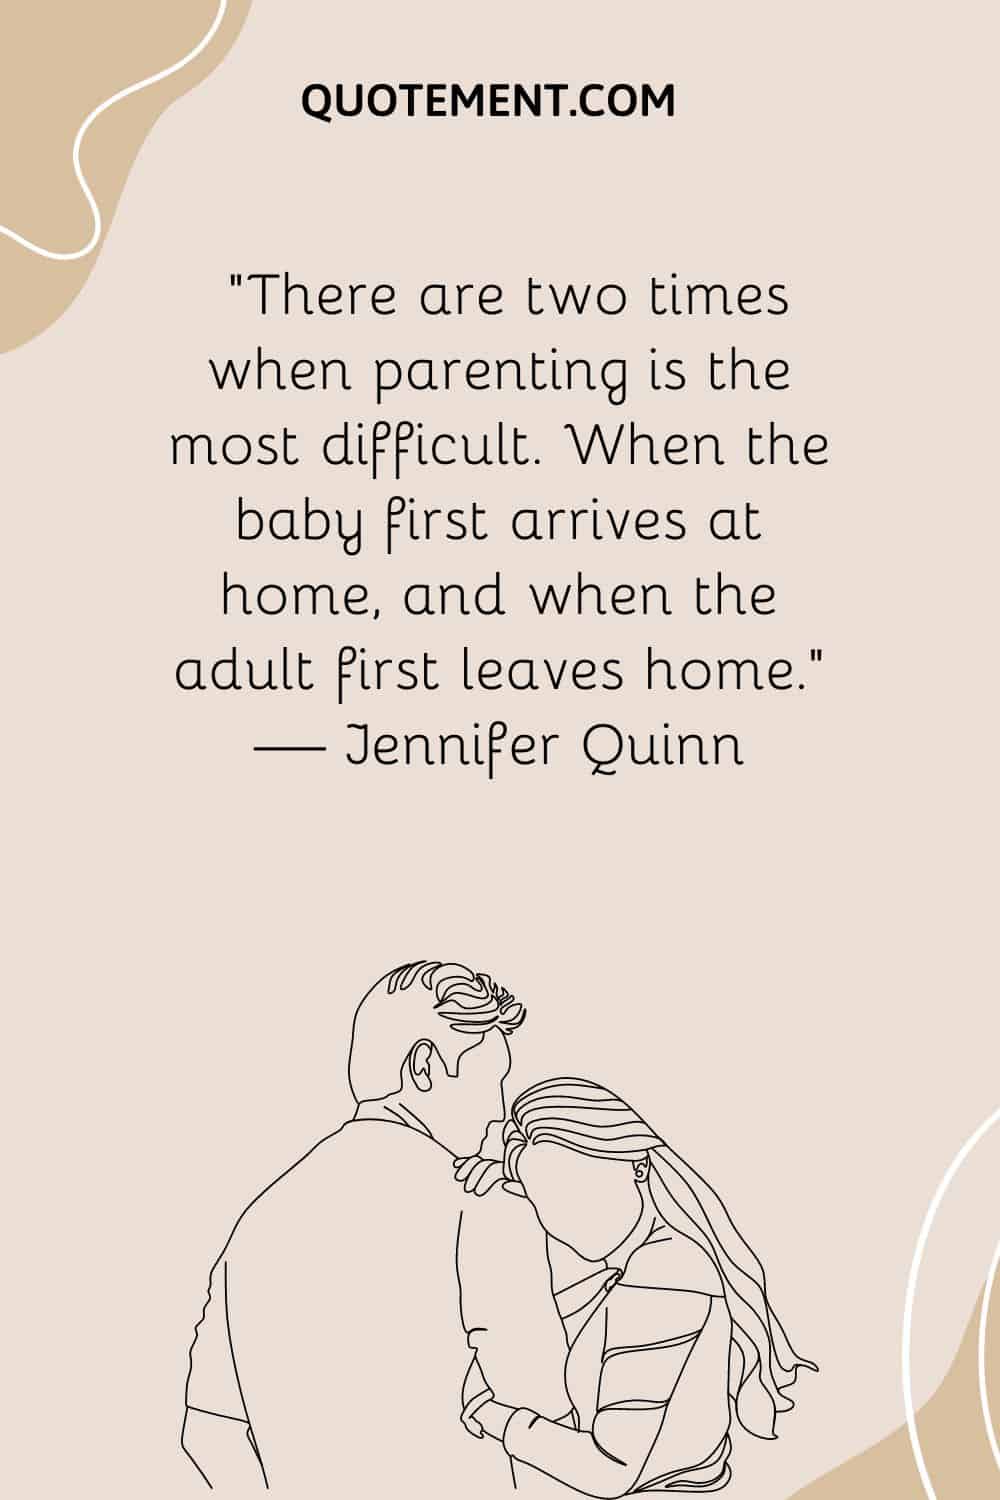 “There are two times when parenting is the most difficult. When the baby first arrives at home, and when the adult first leaves home.” — Jennifer Quinn